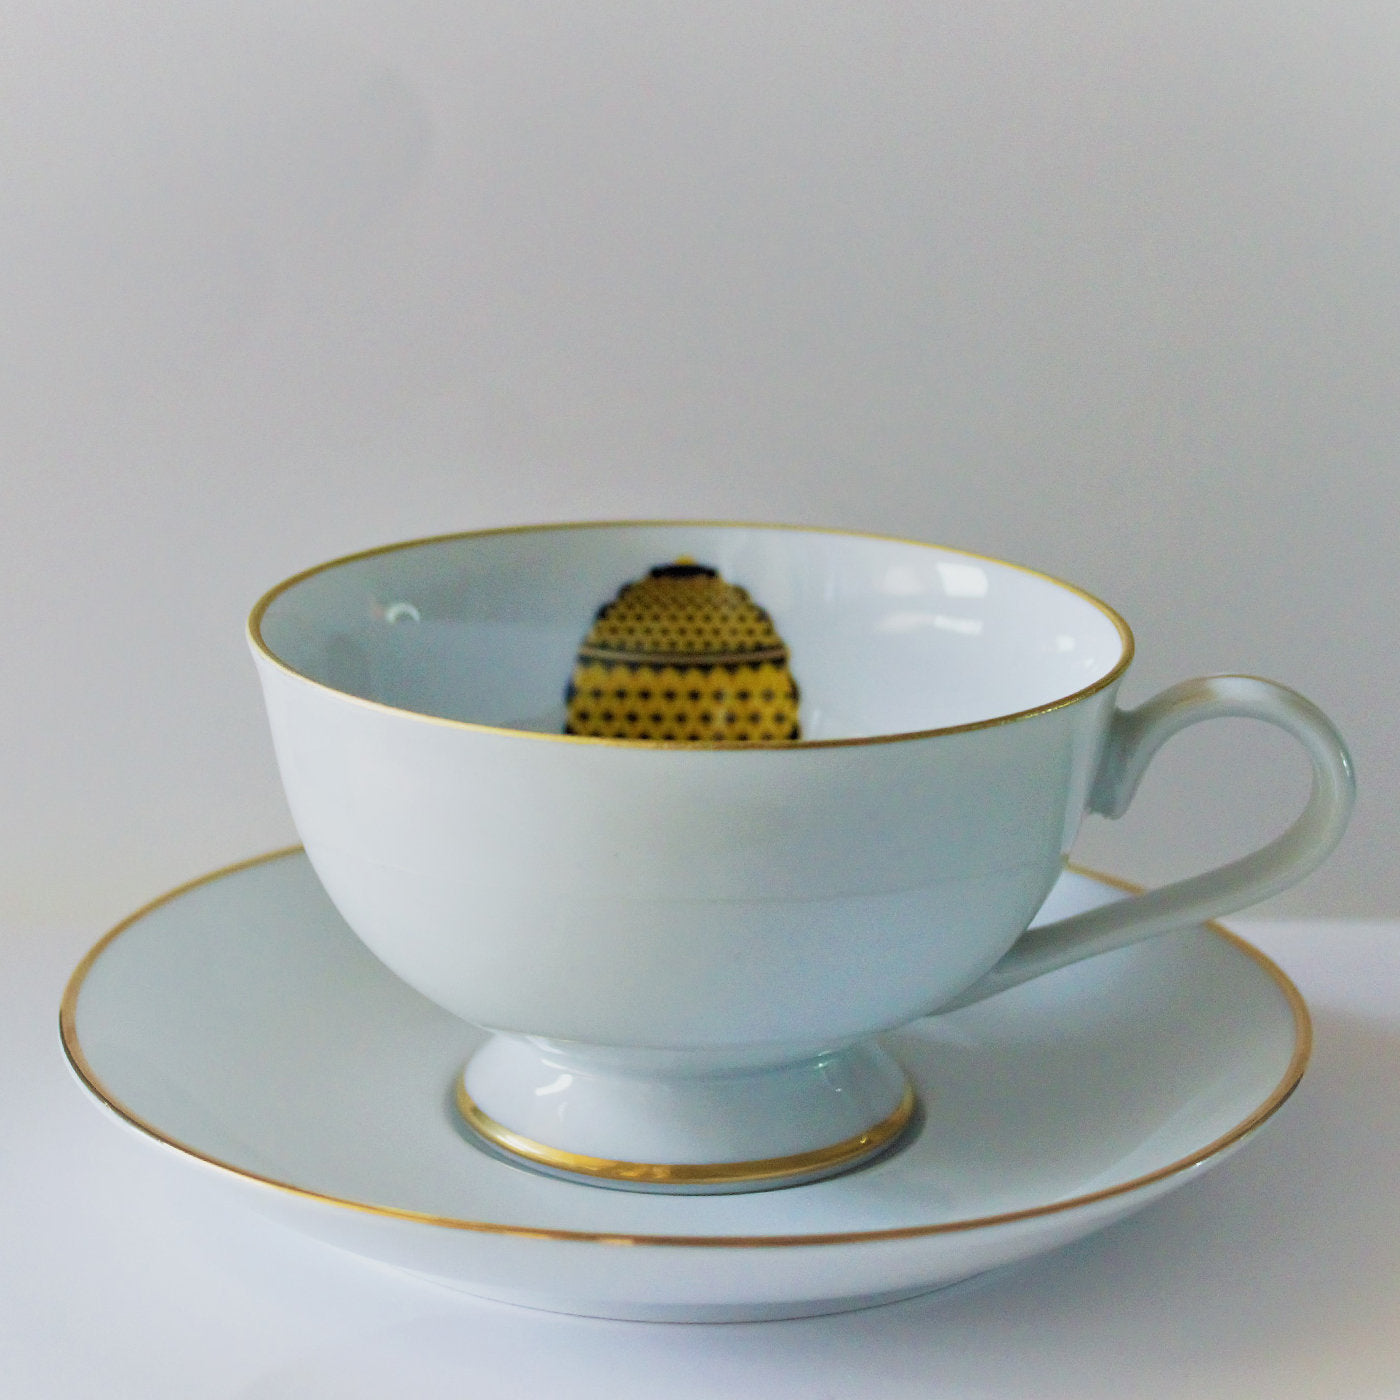 UOVO Yellow Tea Cup with saucer - Set of 4 - Alternative view 1